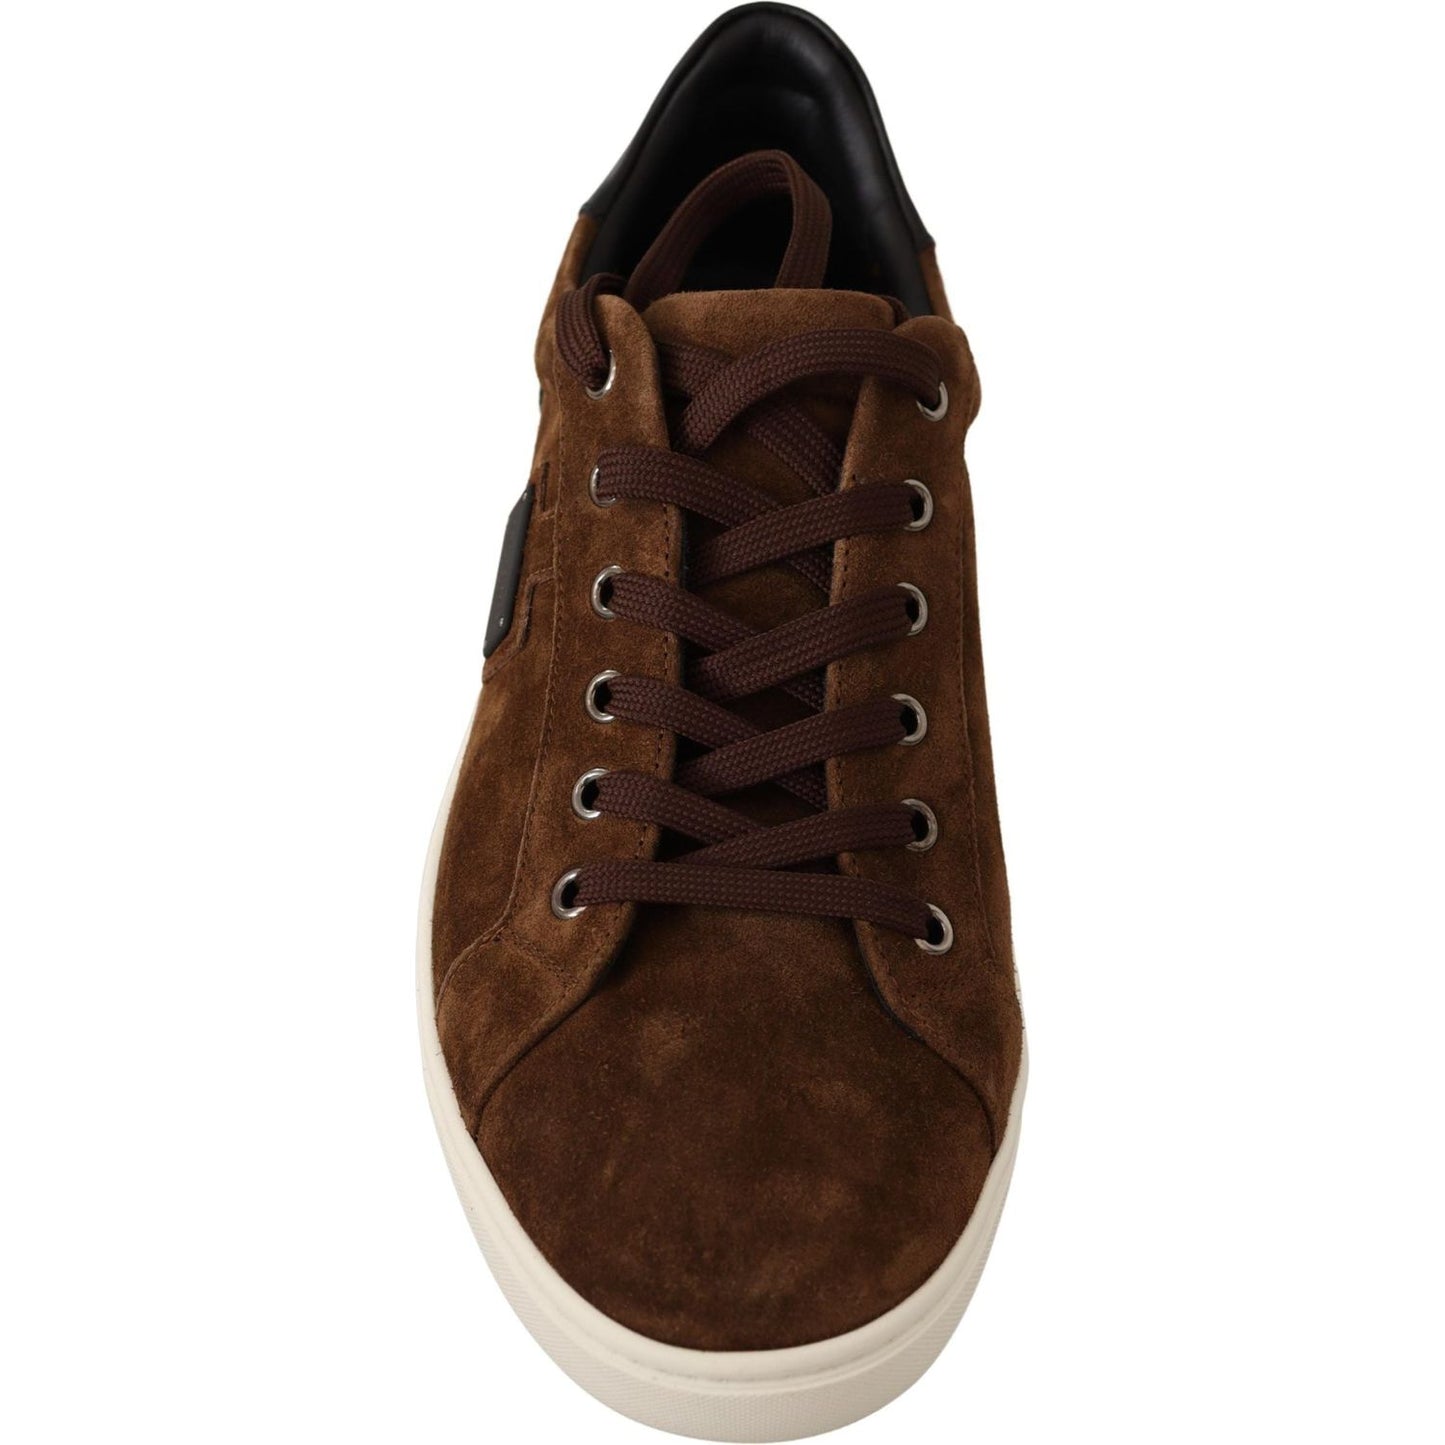 Dolce & Gabbana Elegant Leather Casual Sneakers in Brown brown-suede-leather-mens-low-tops-sneakers IMG_4825-scaled-99e30756-423.jpg